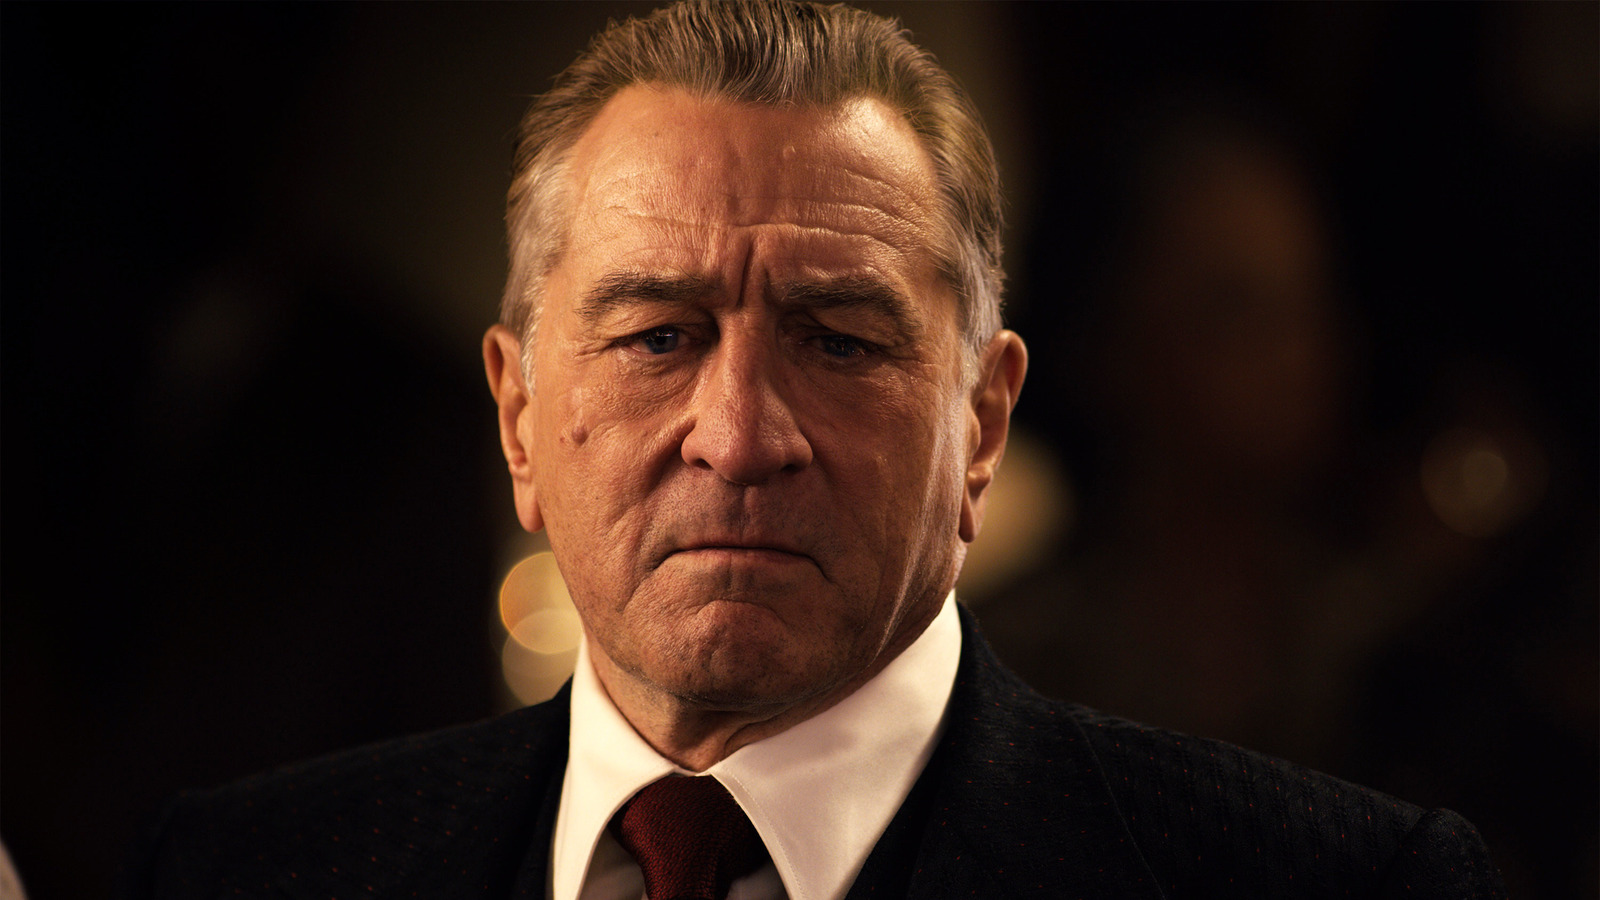 Wise Guys Everything We Know So Far About Robert De Niro's New